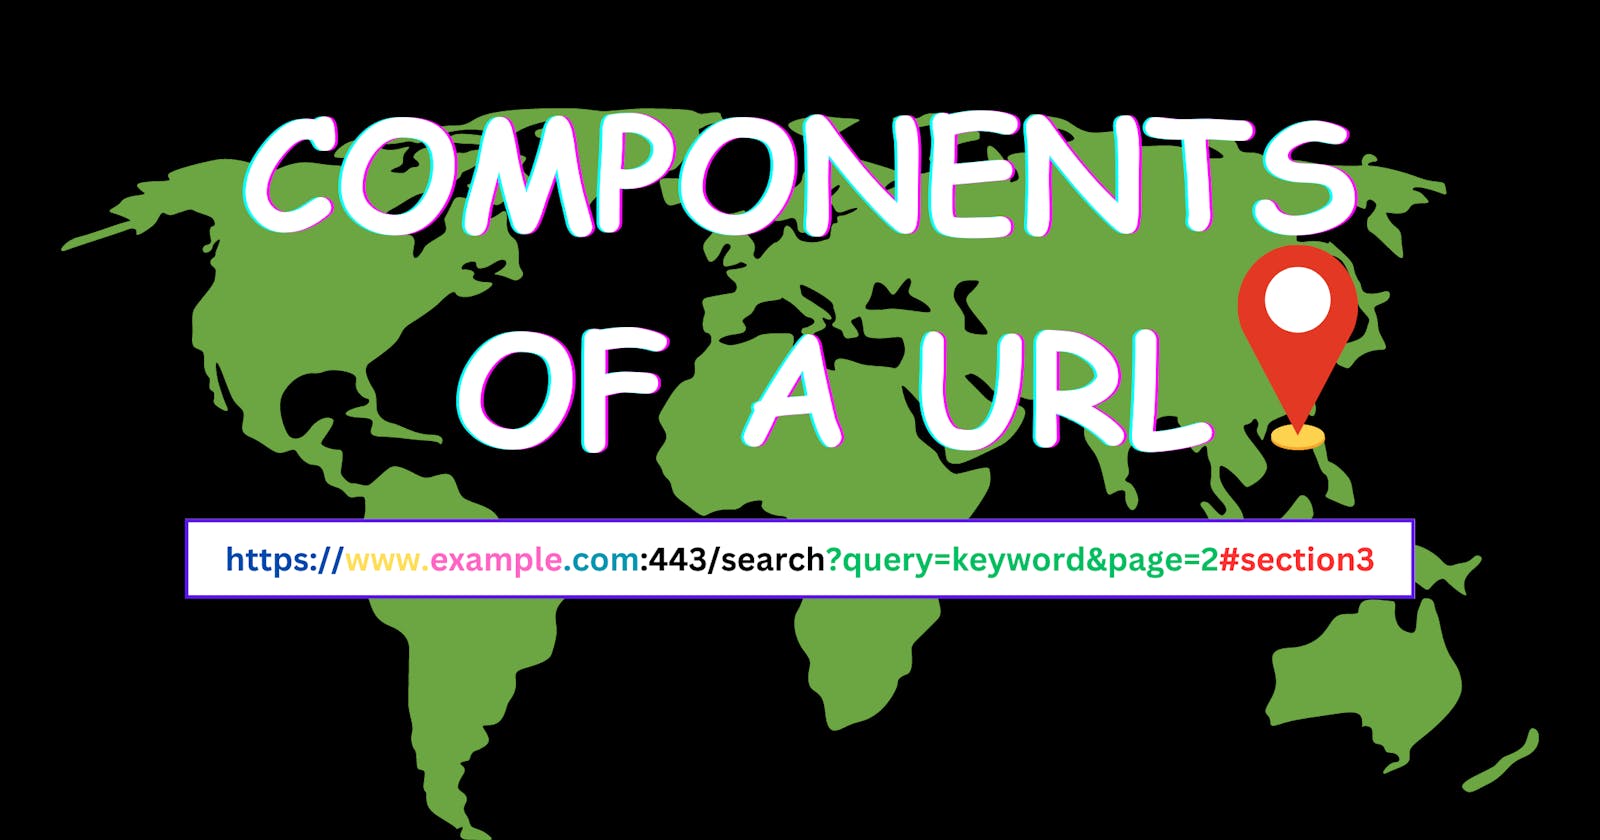 Components of a Website Address - The URL